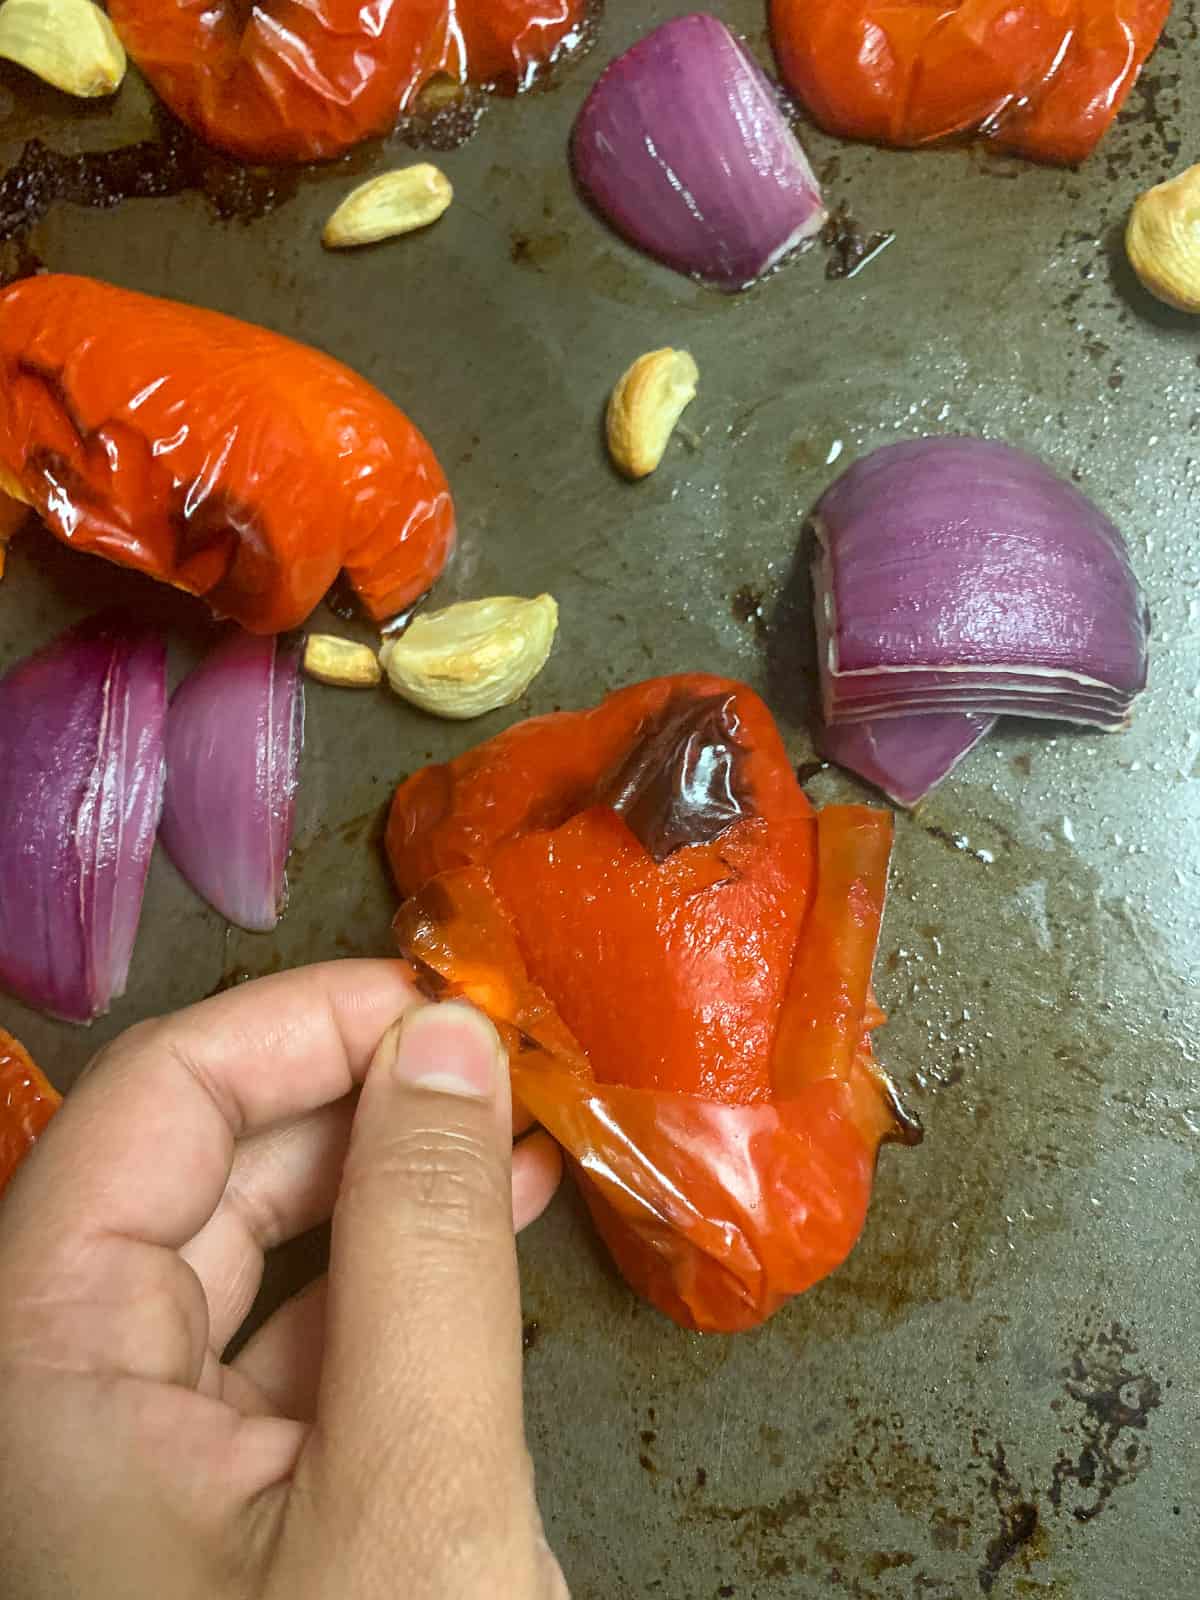 Peeling off the skin of roasted peppers